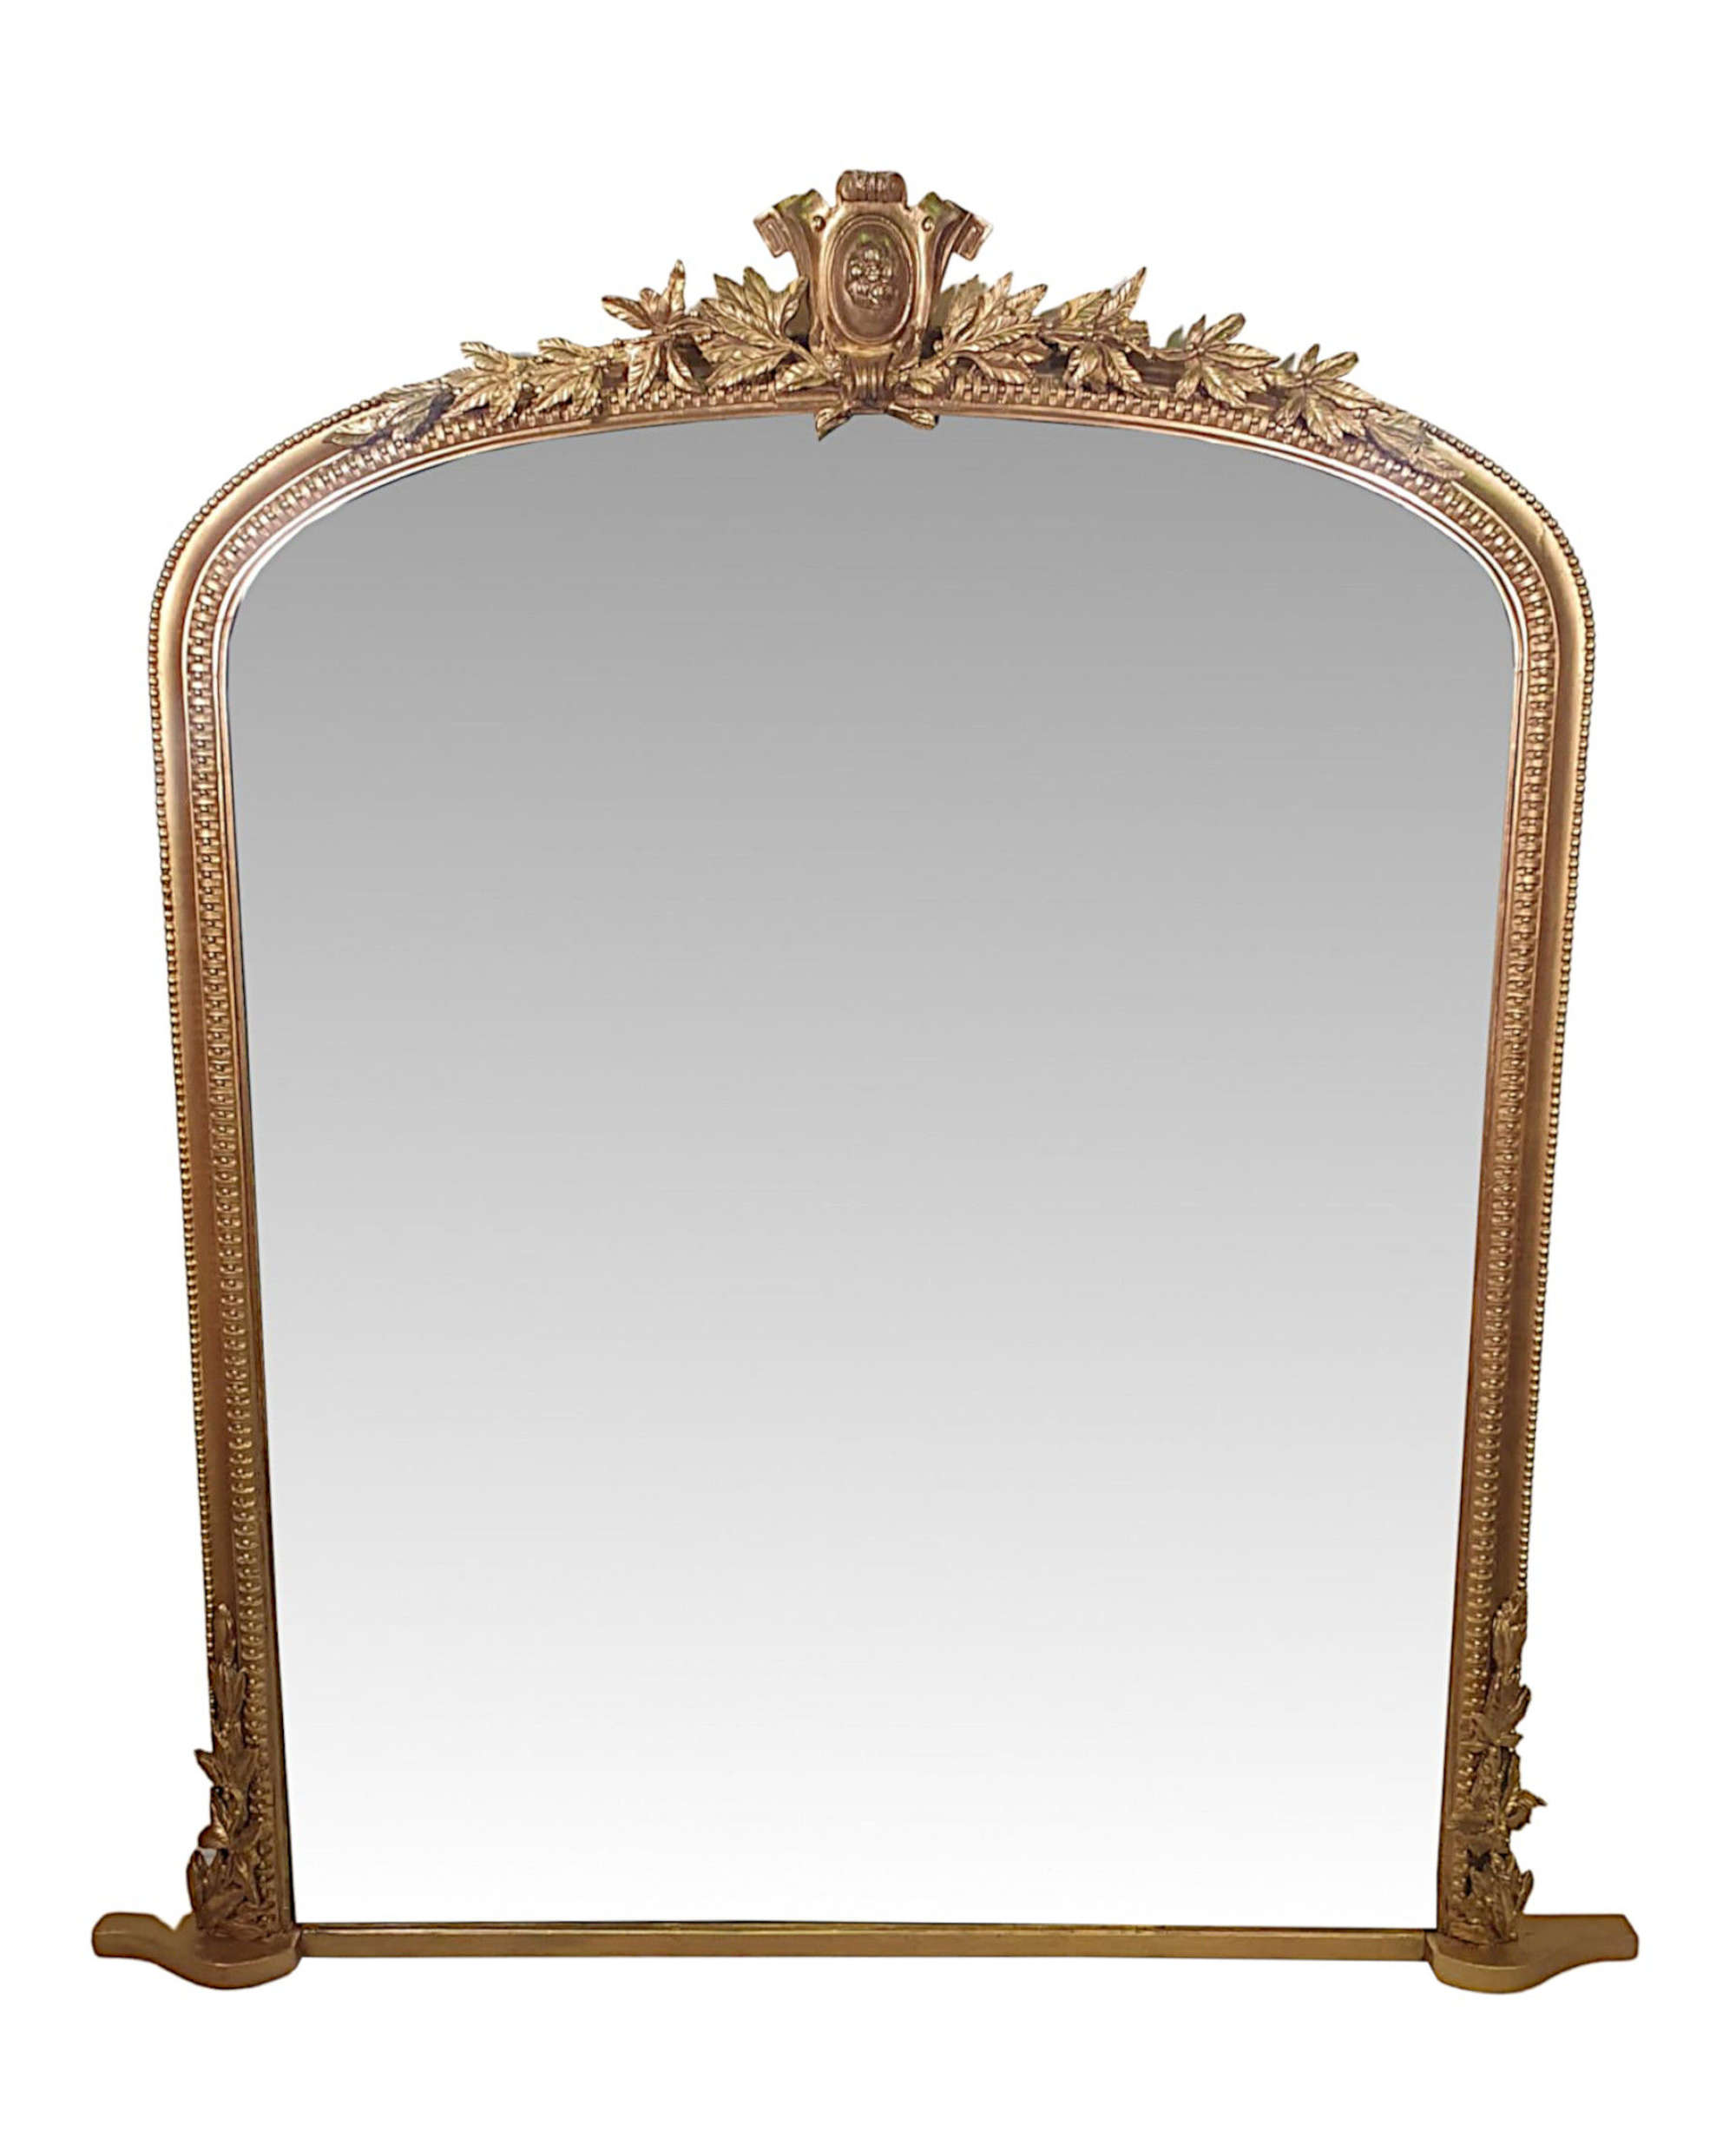 A Stunning Large 19th Century Arch Top Giltwood Overmantle Mirror